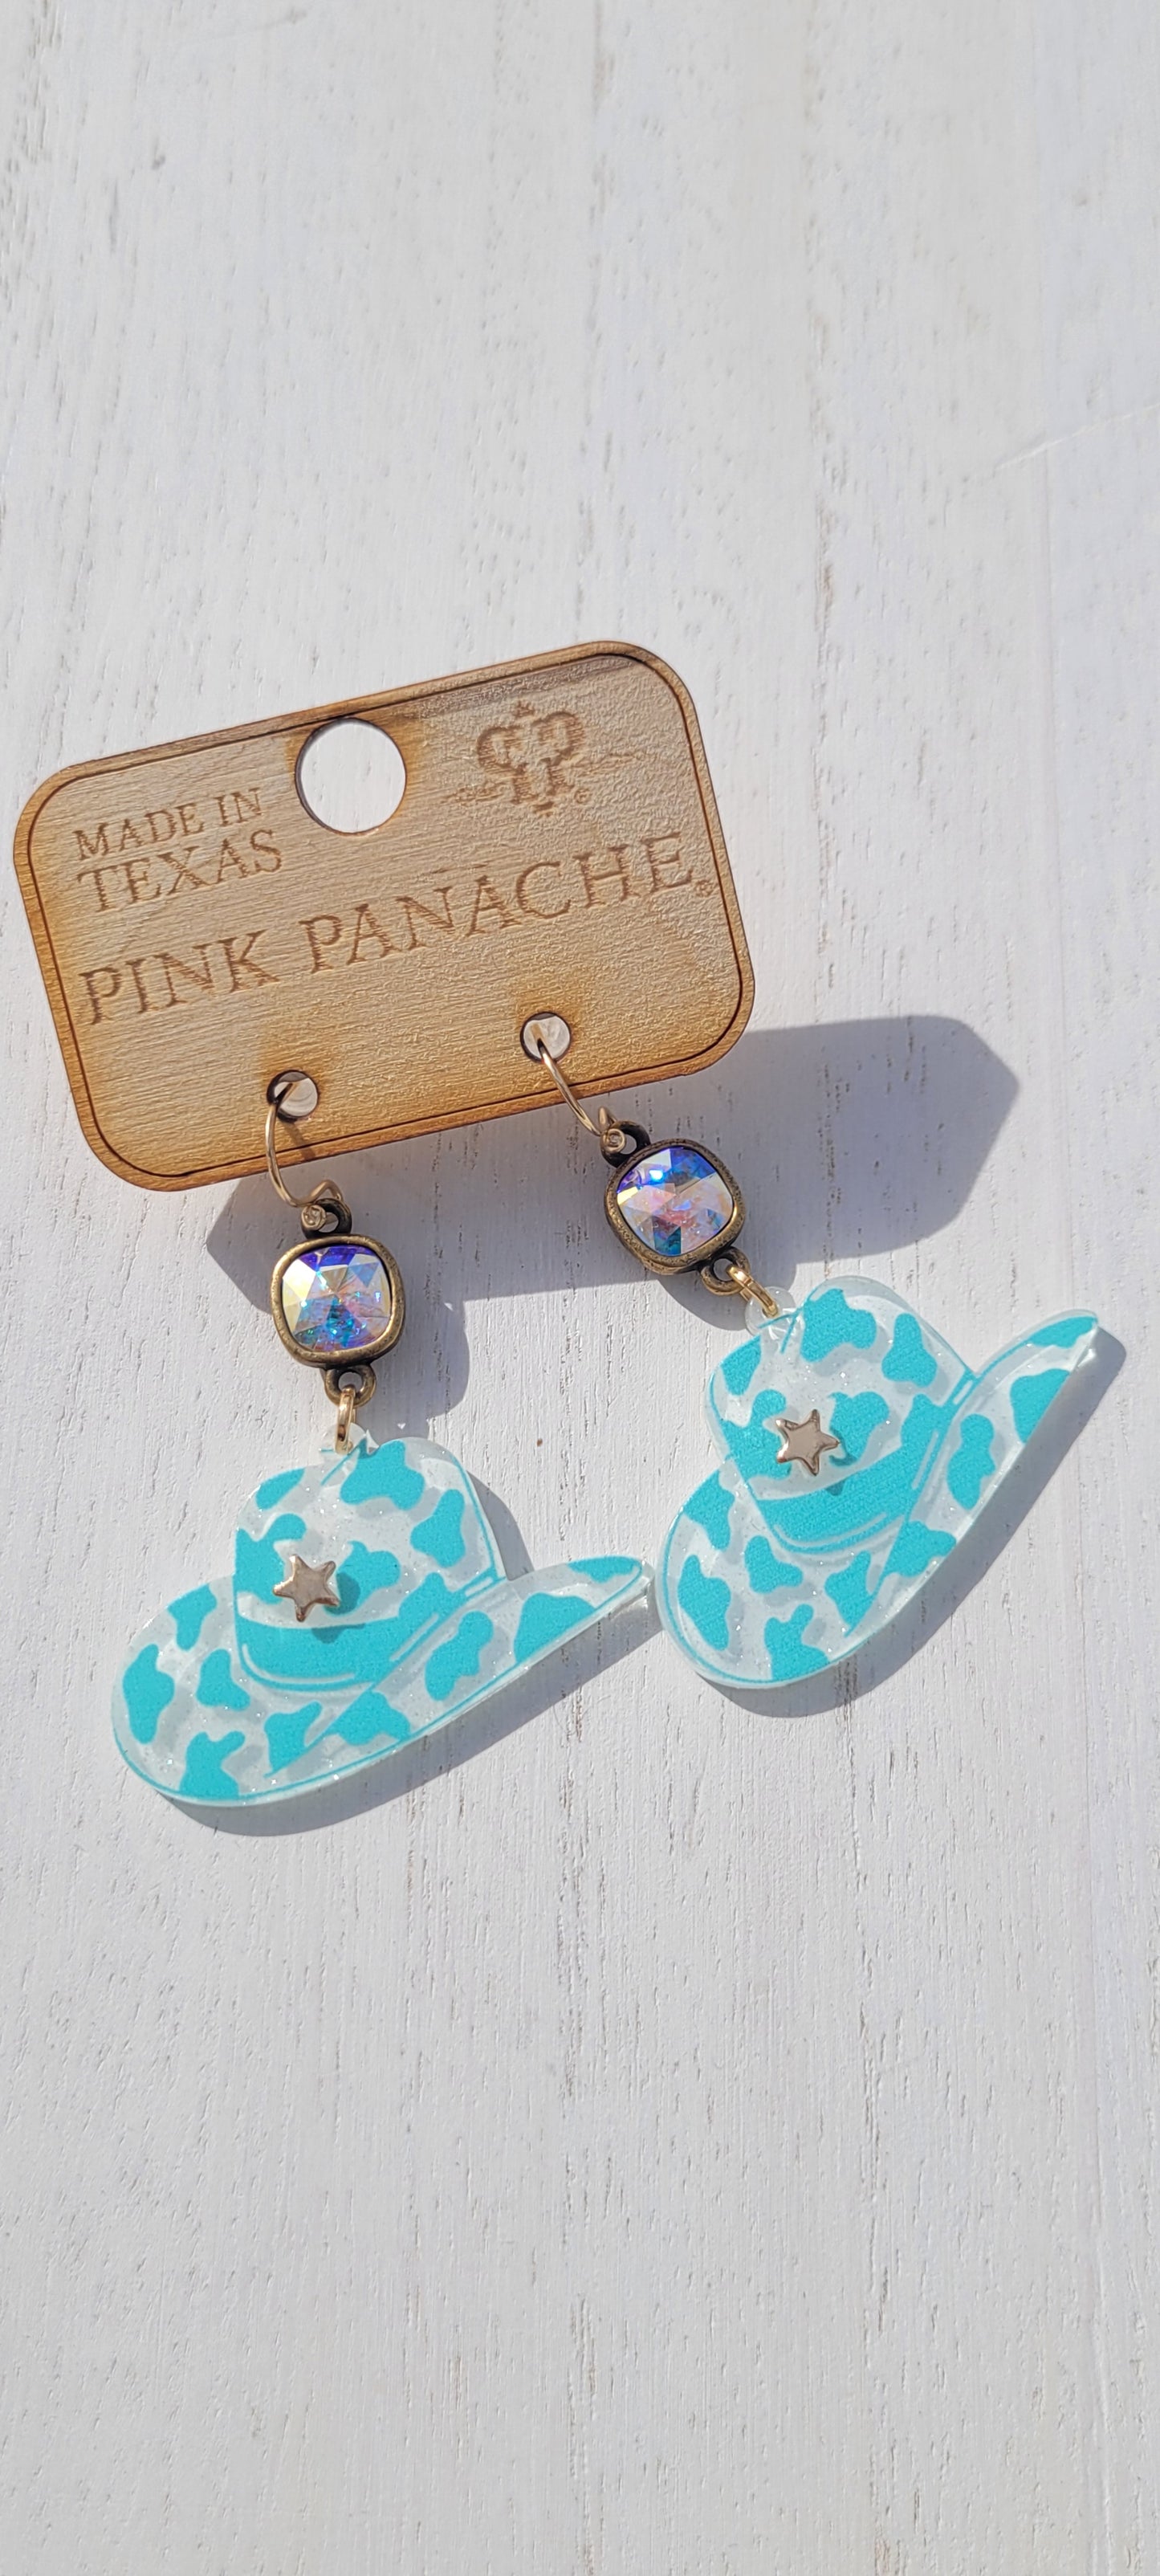 Pink Panache: Cowboy Hats Pink Panache Earrings Color: 8mm bronze/AB cushion cut connector on turquoise acrylic hat earring Limited supply! Keywords: Earrings, Jewelry